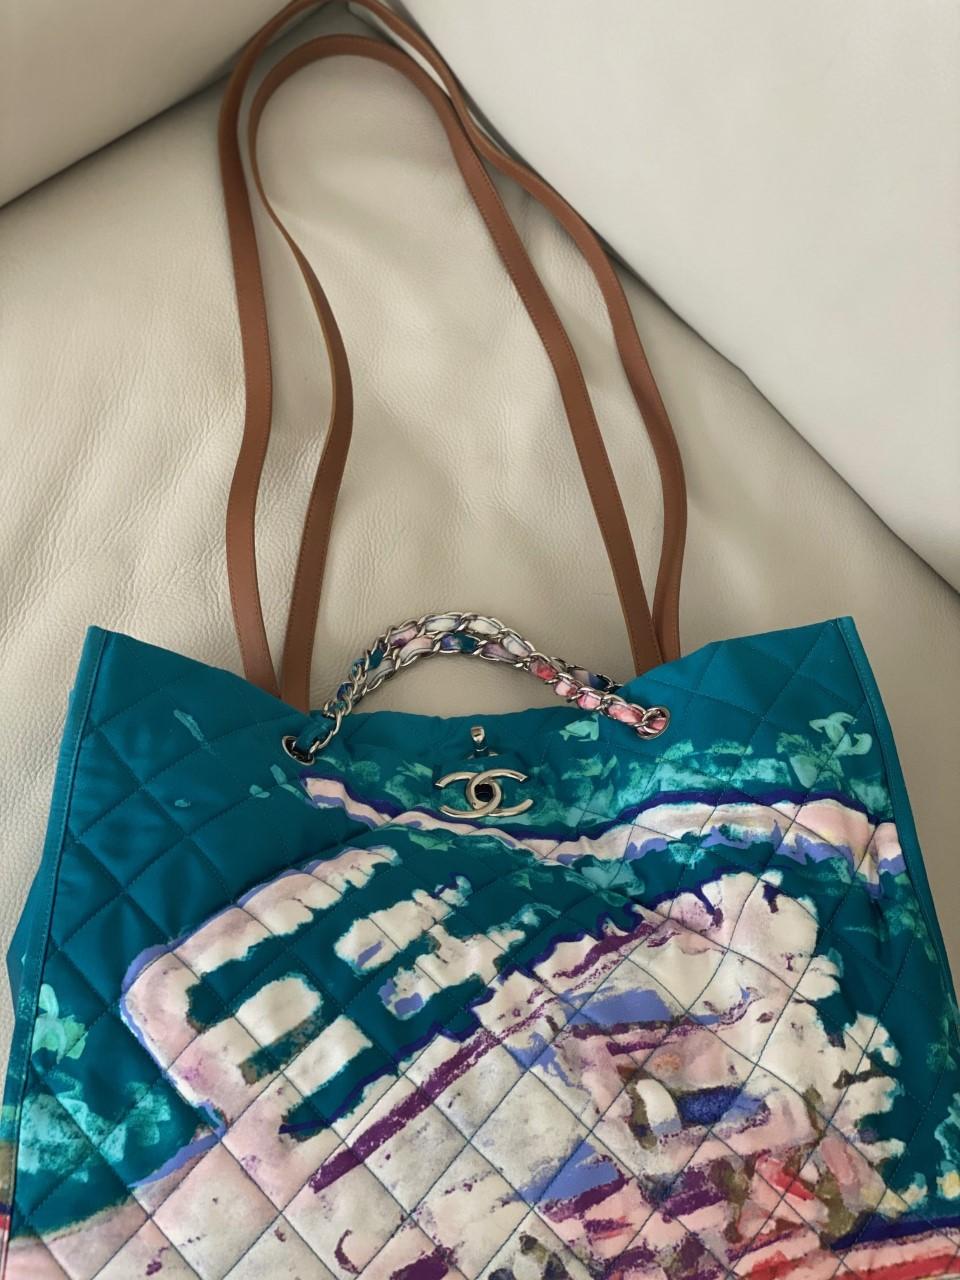 Women's or Men's 2011 Chanel NEW Limited Edition watercolor graffiti tote beach bag  For Sale